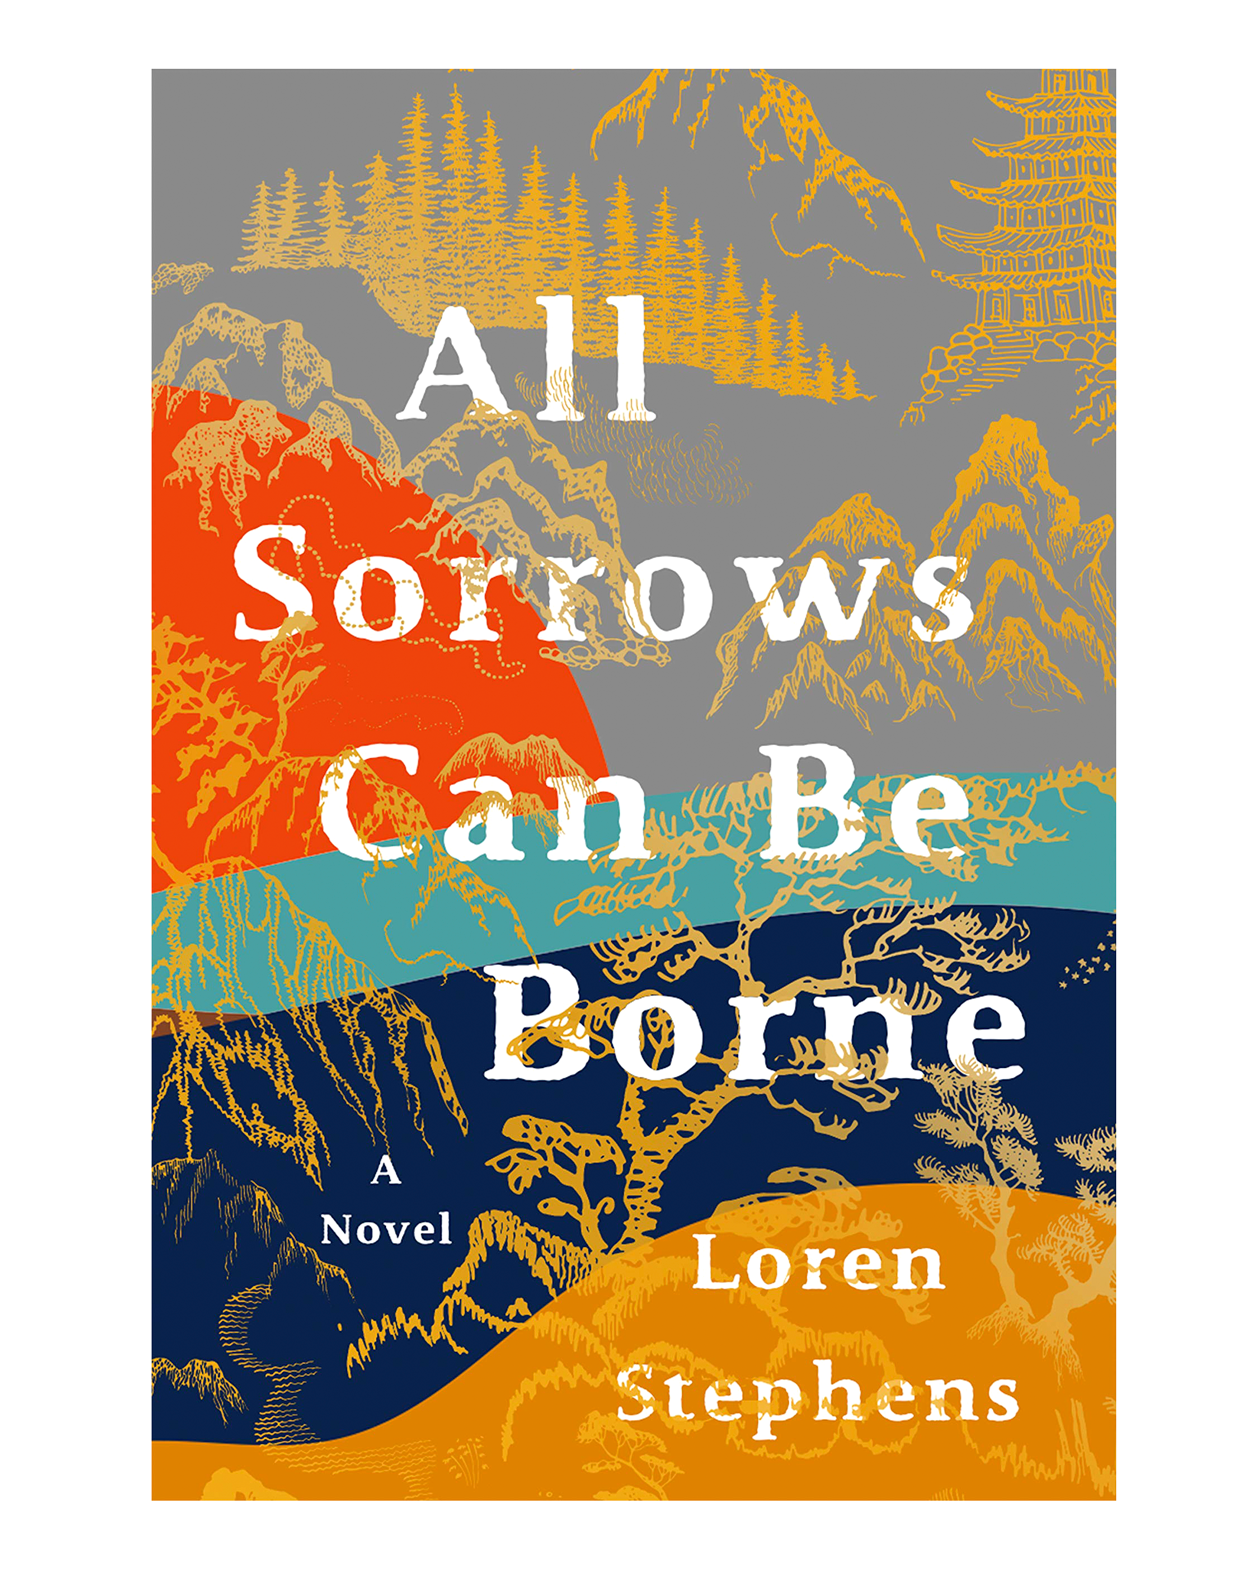 The cover of "All Sorrows Can be Borne"